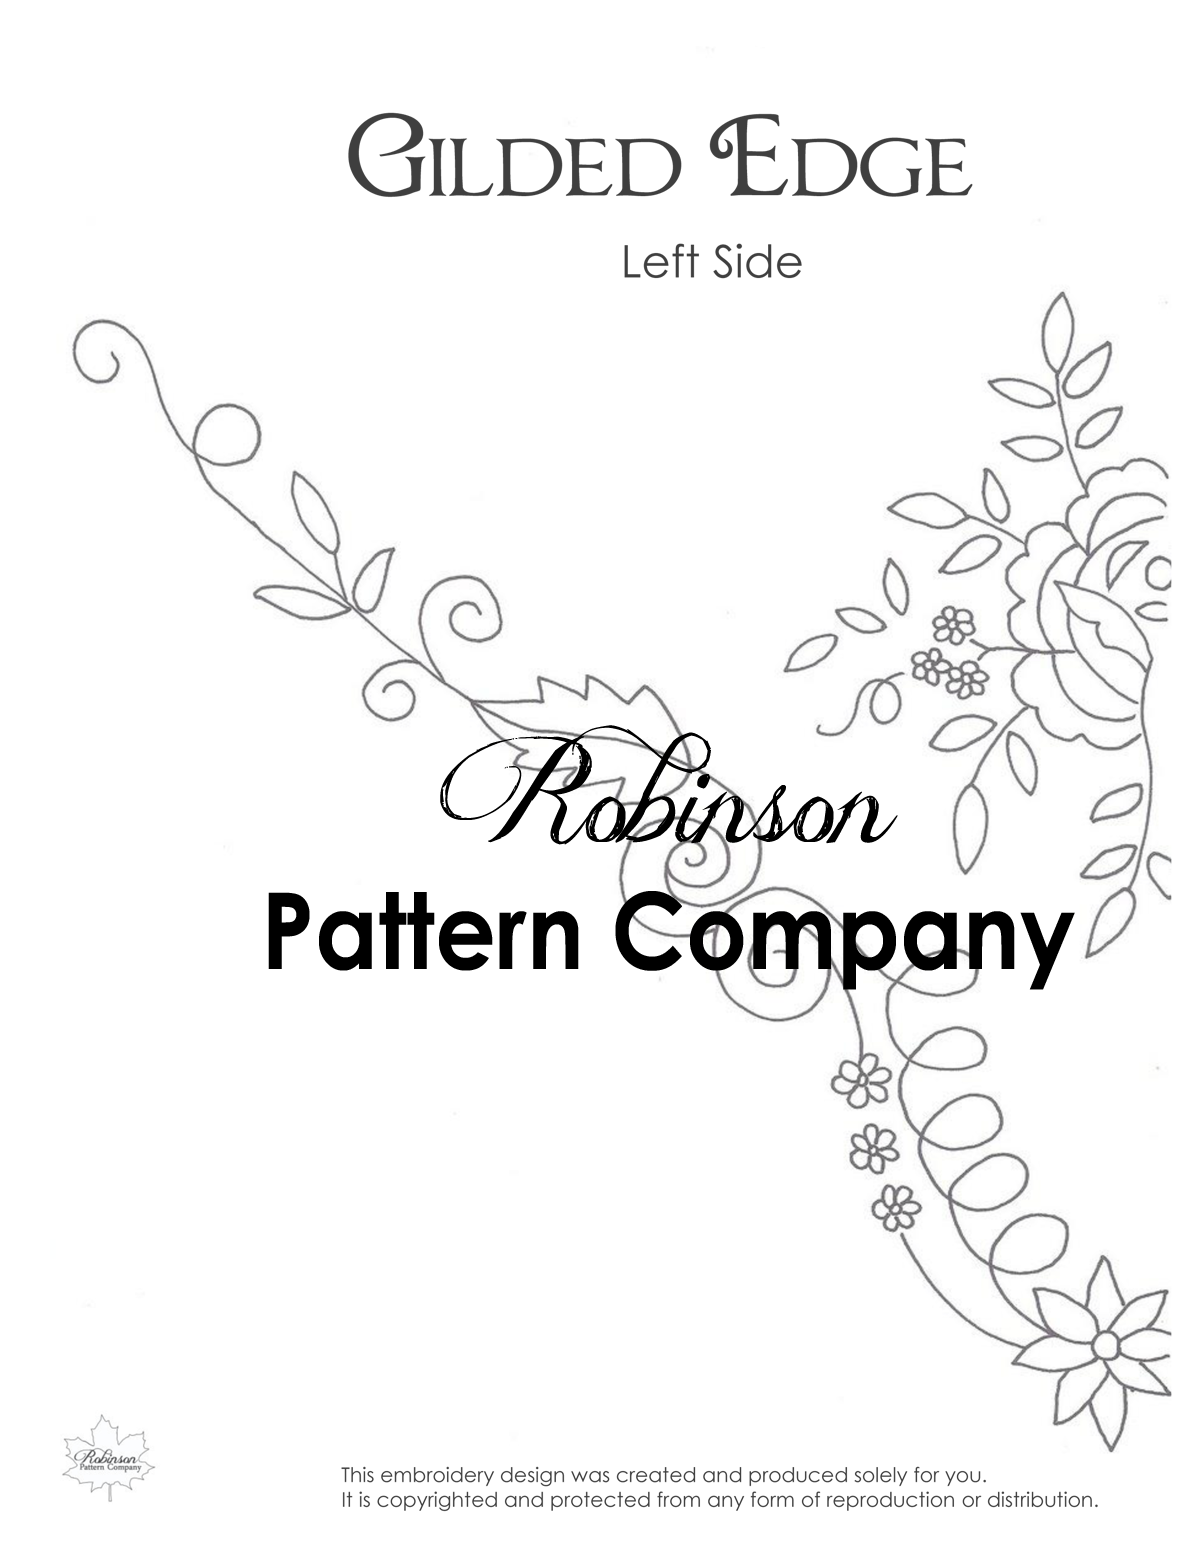 Guilded edge embroidery